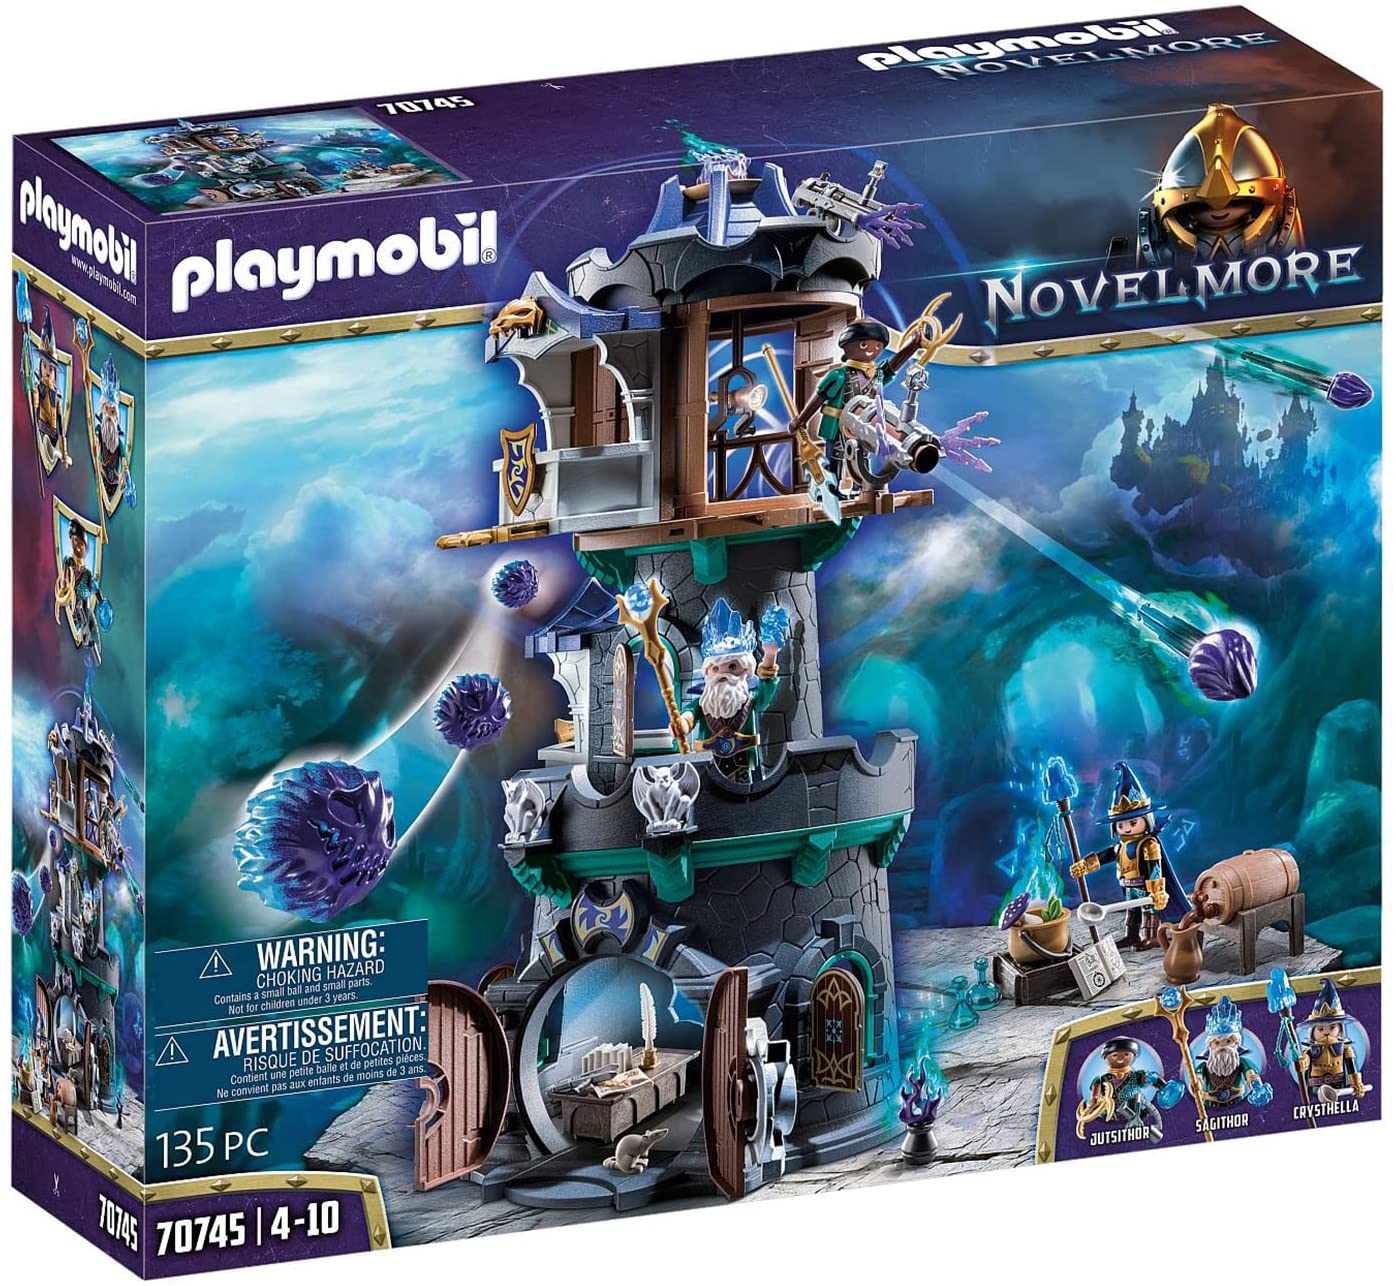 Playmobil Novelmore 70745 Violet Vale - Magic Tower, From 4 Years